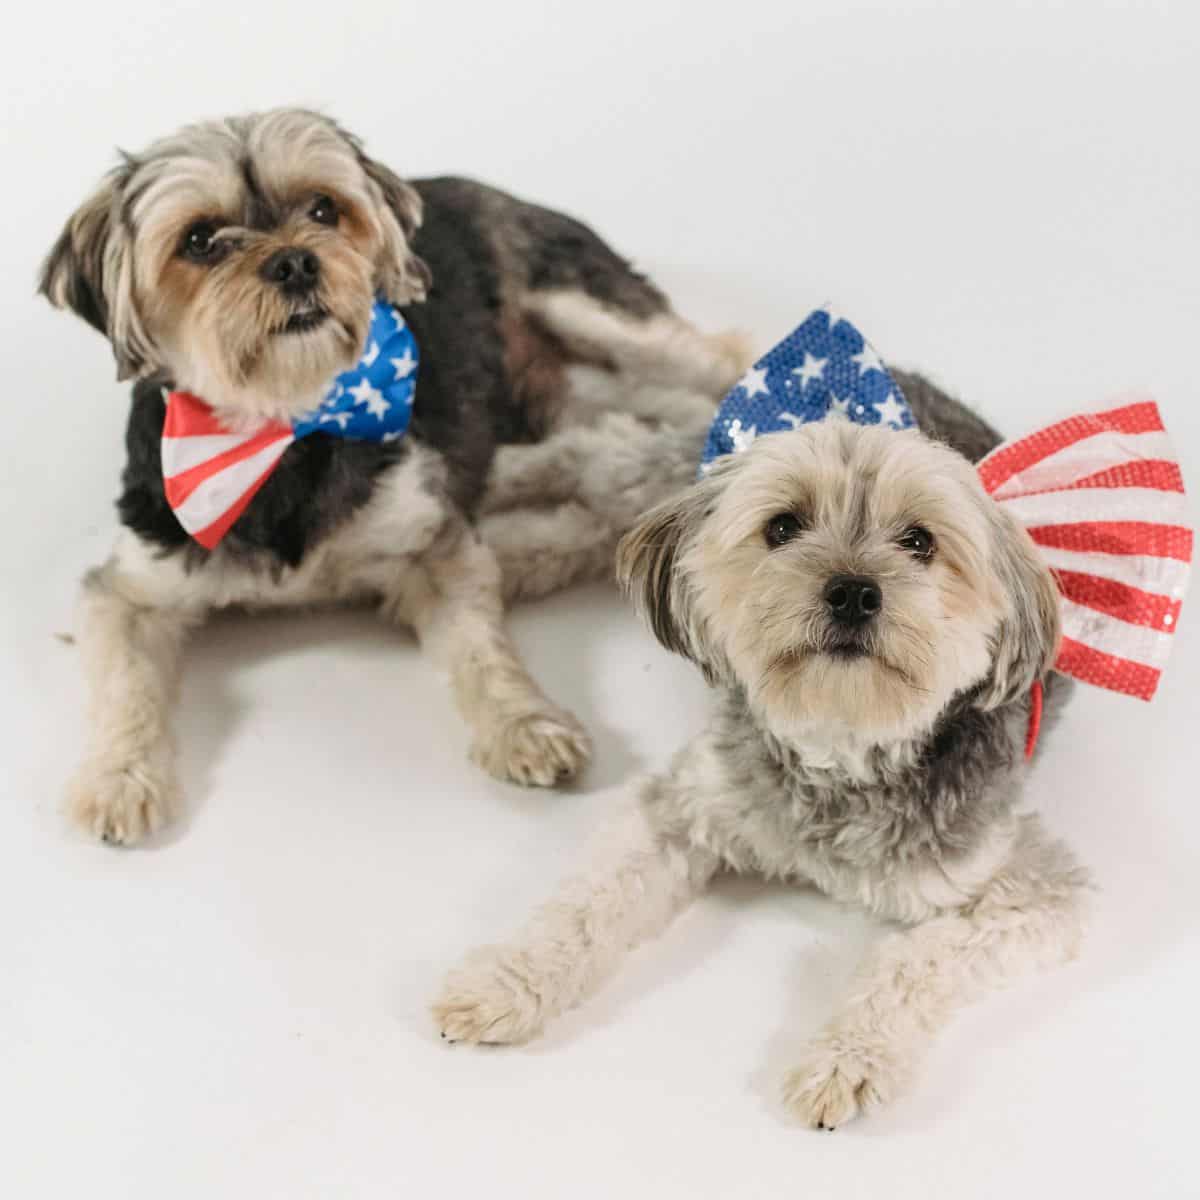 Keep your Pets Safe on 4th of July